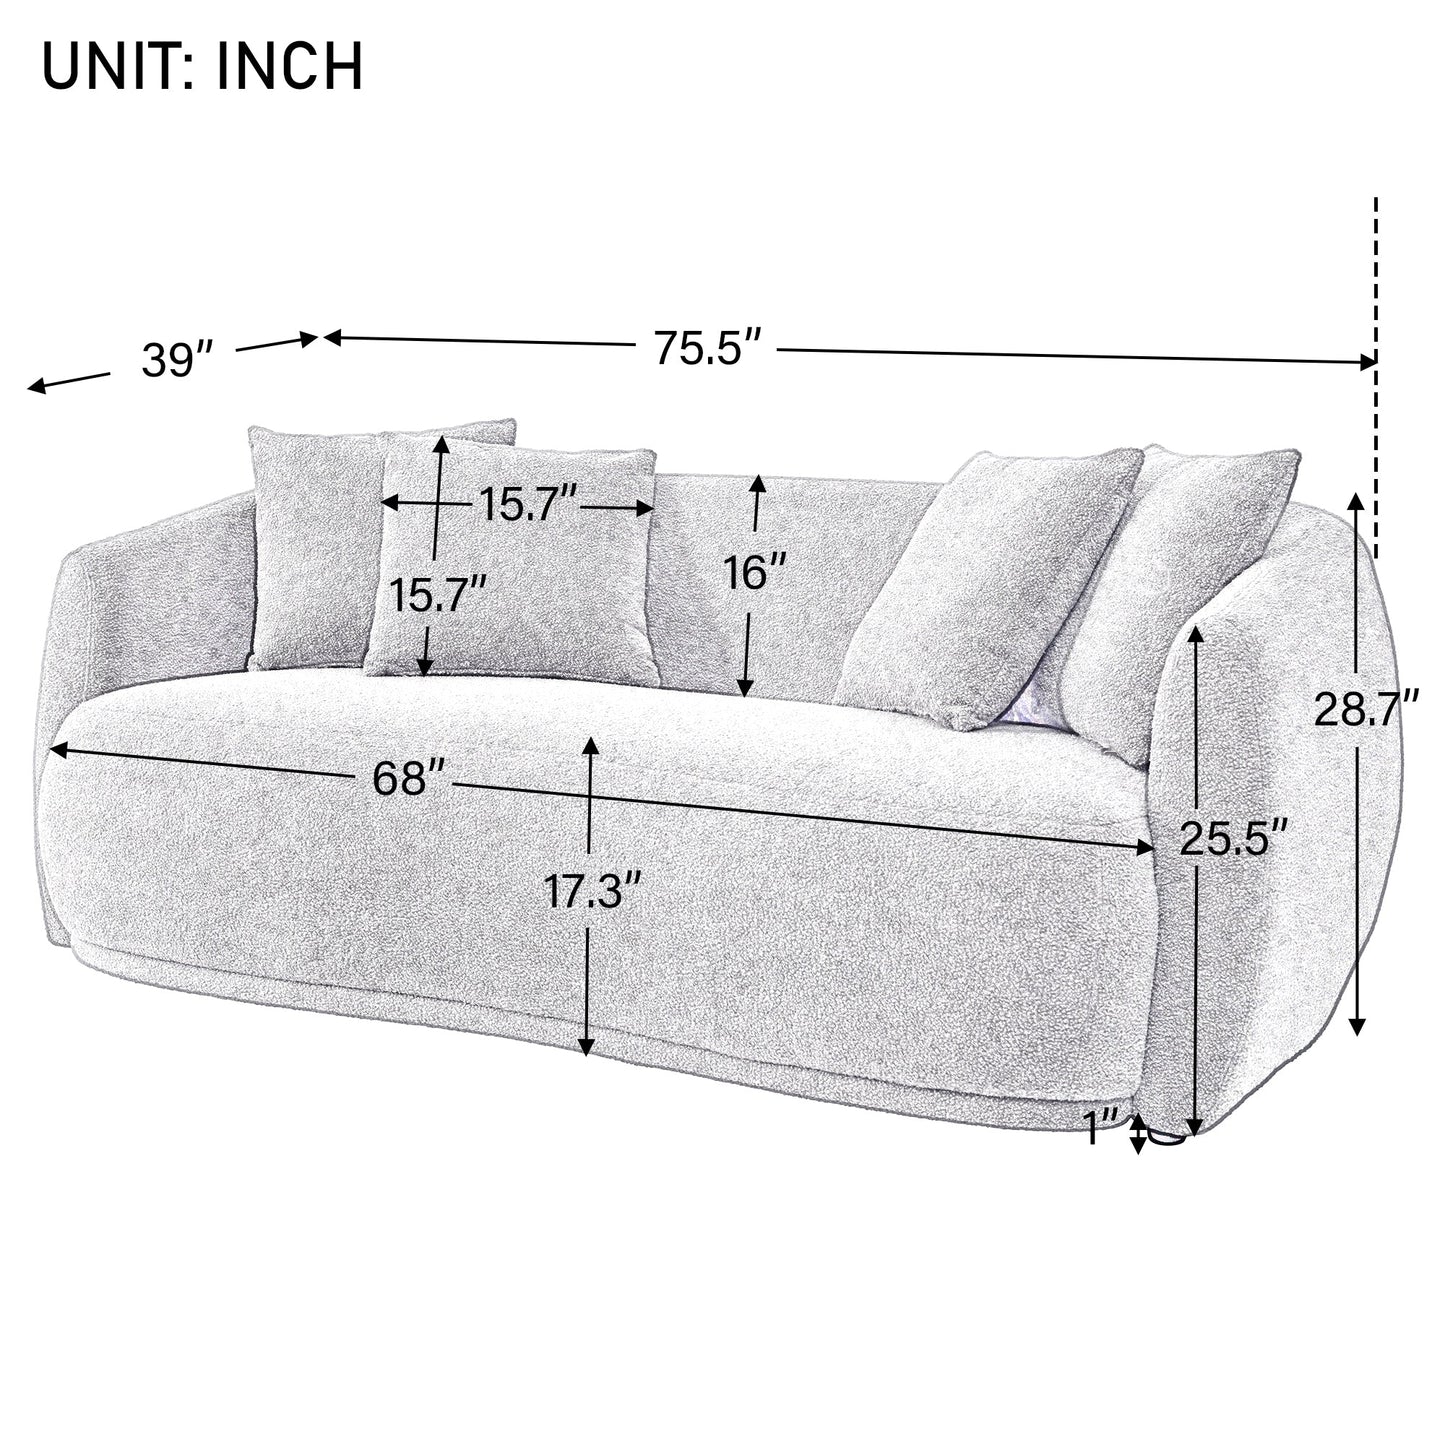 U_Style Upholstered Sofa Set,Modern Arm Chair for Living Room and